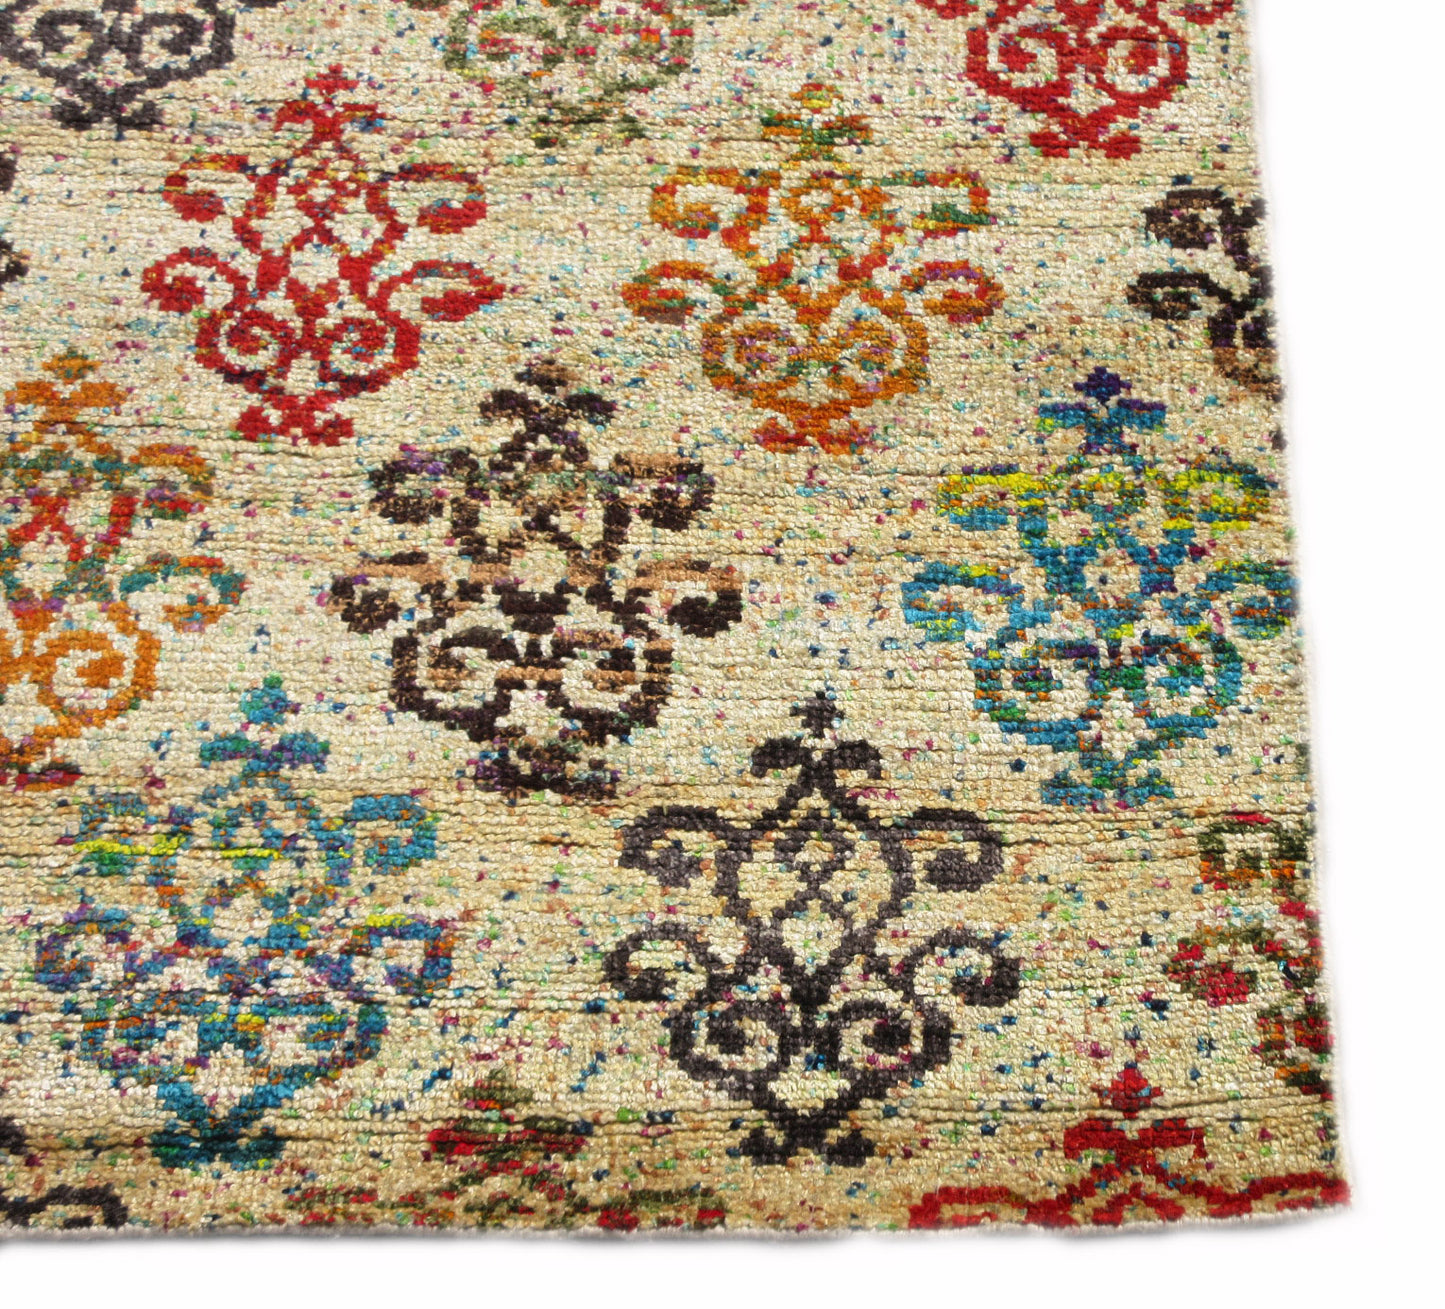 8X10 Modern Multicolored Hand-Knotted Silk Rug